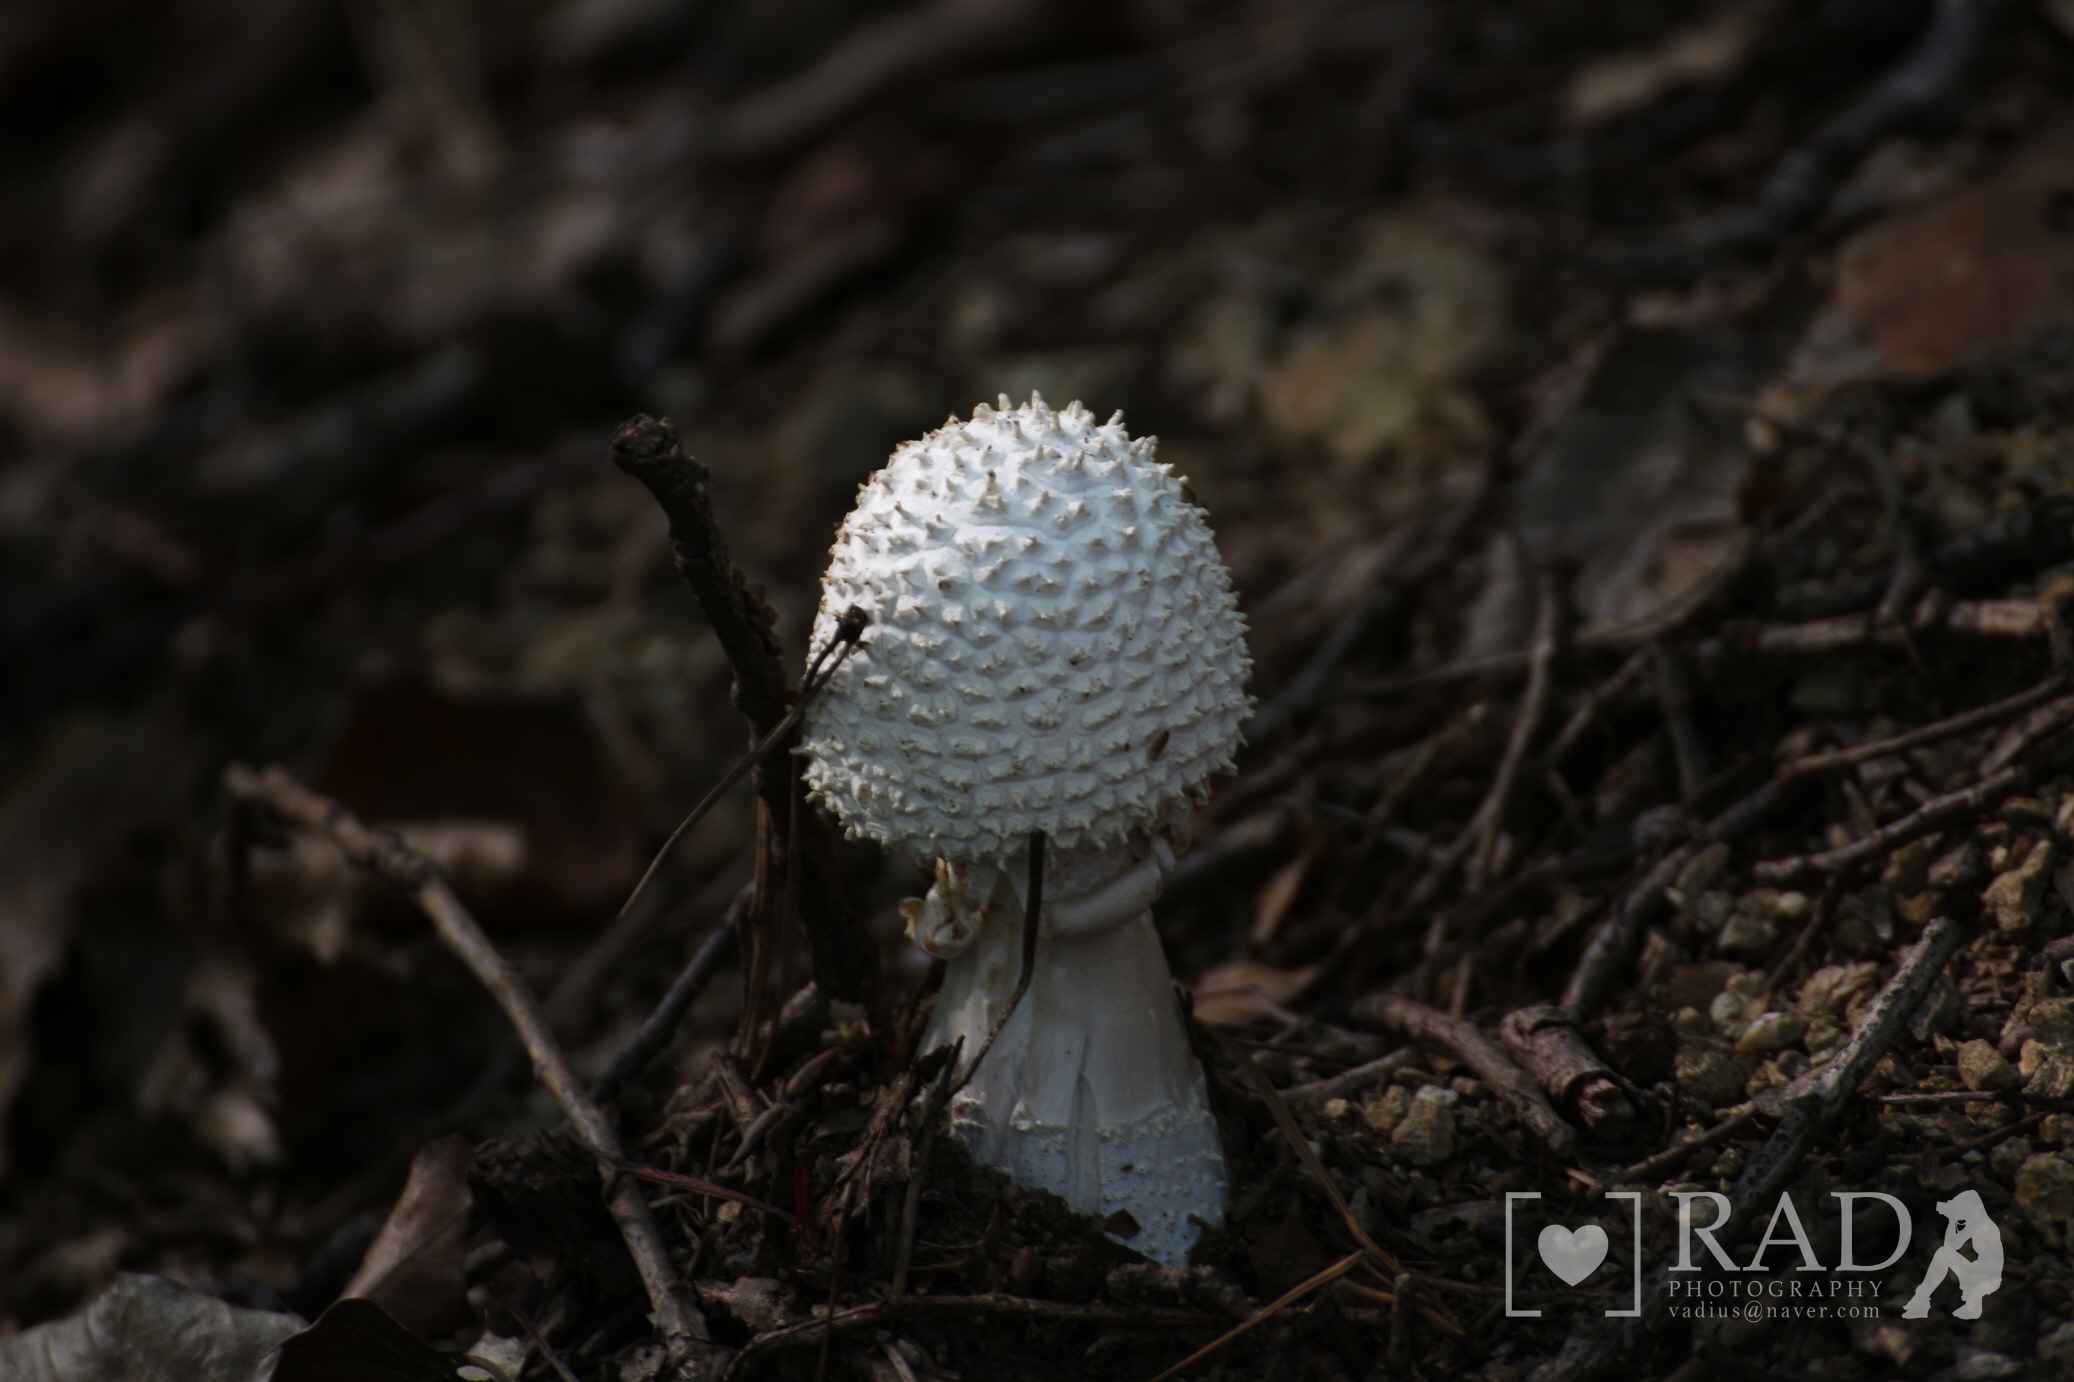 Mushrooms in the forest 02